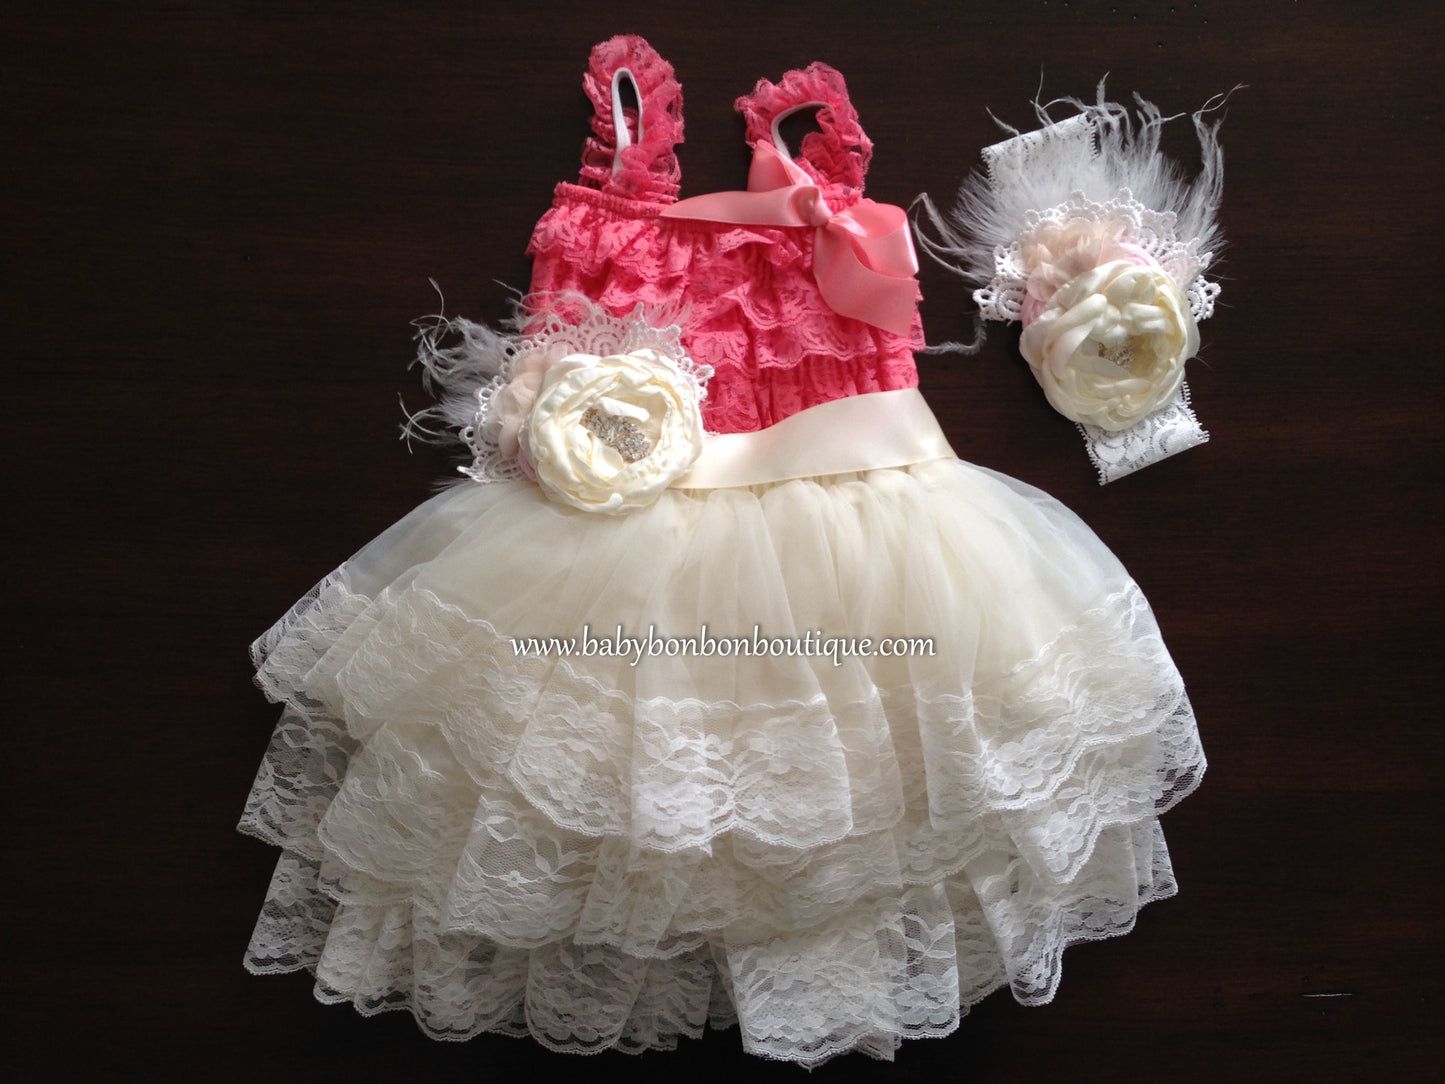 Lace Romper and Fluffy Lace Skirt with Headband & Sash